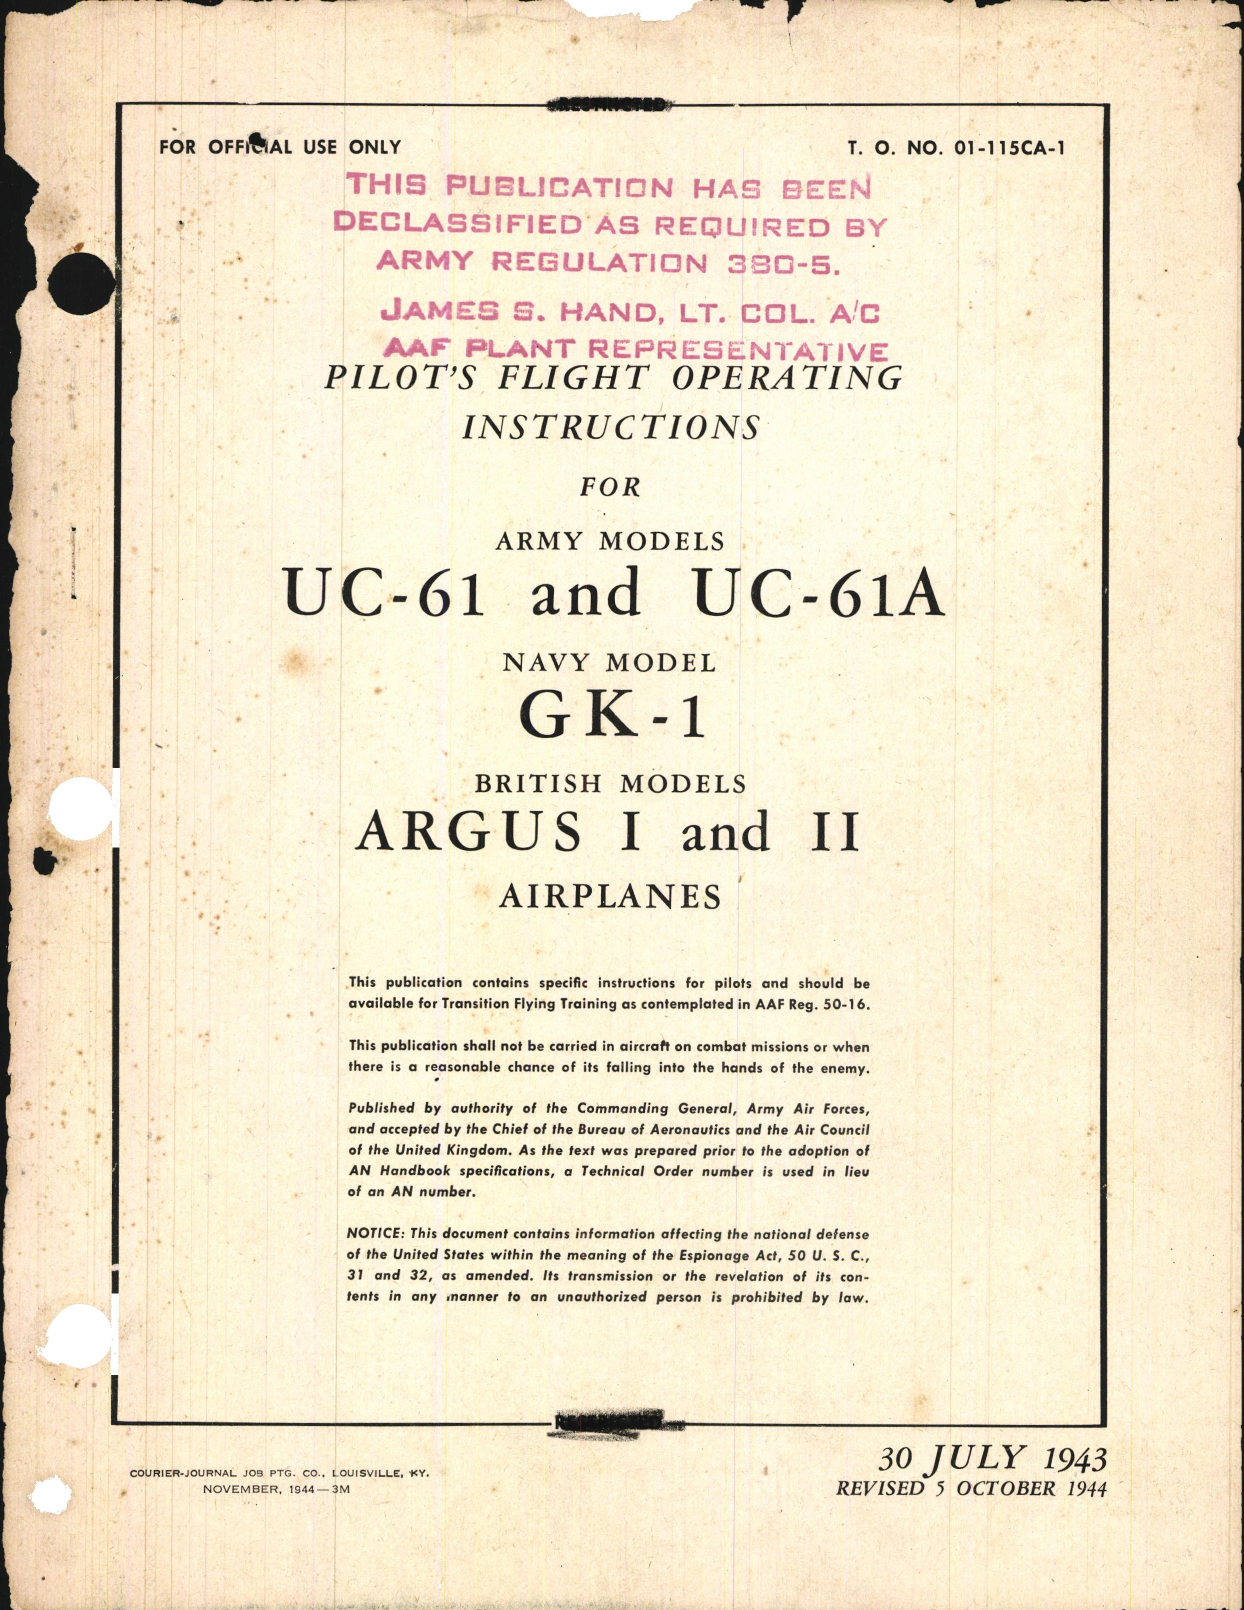 Sample page 1 from AirCorps Library document: Pilot's Flight Operating Instructions for UC-61, UC-61A, GK-1